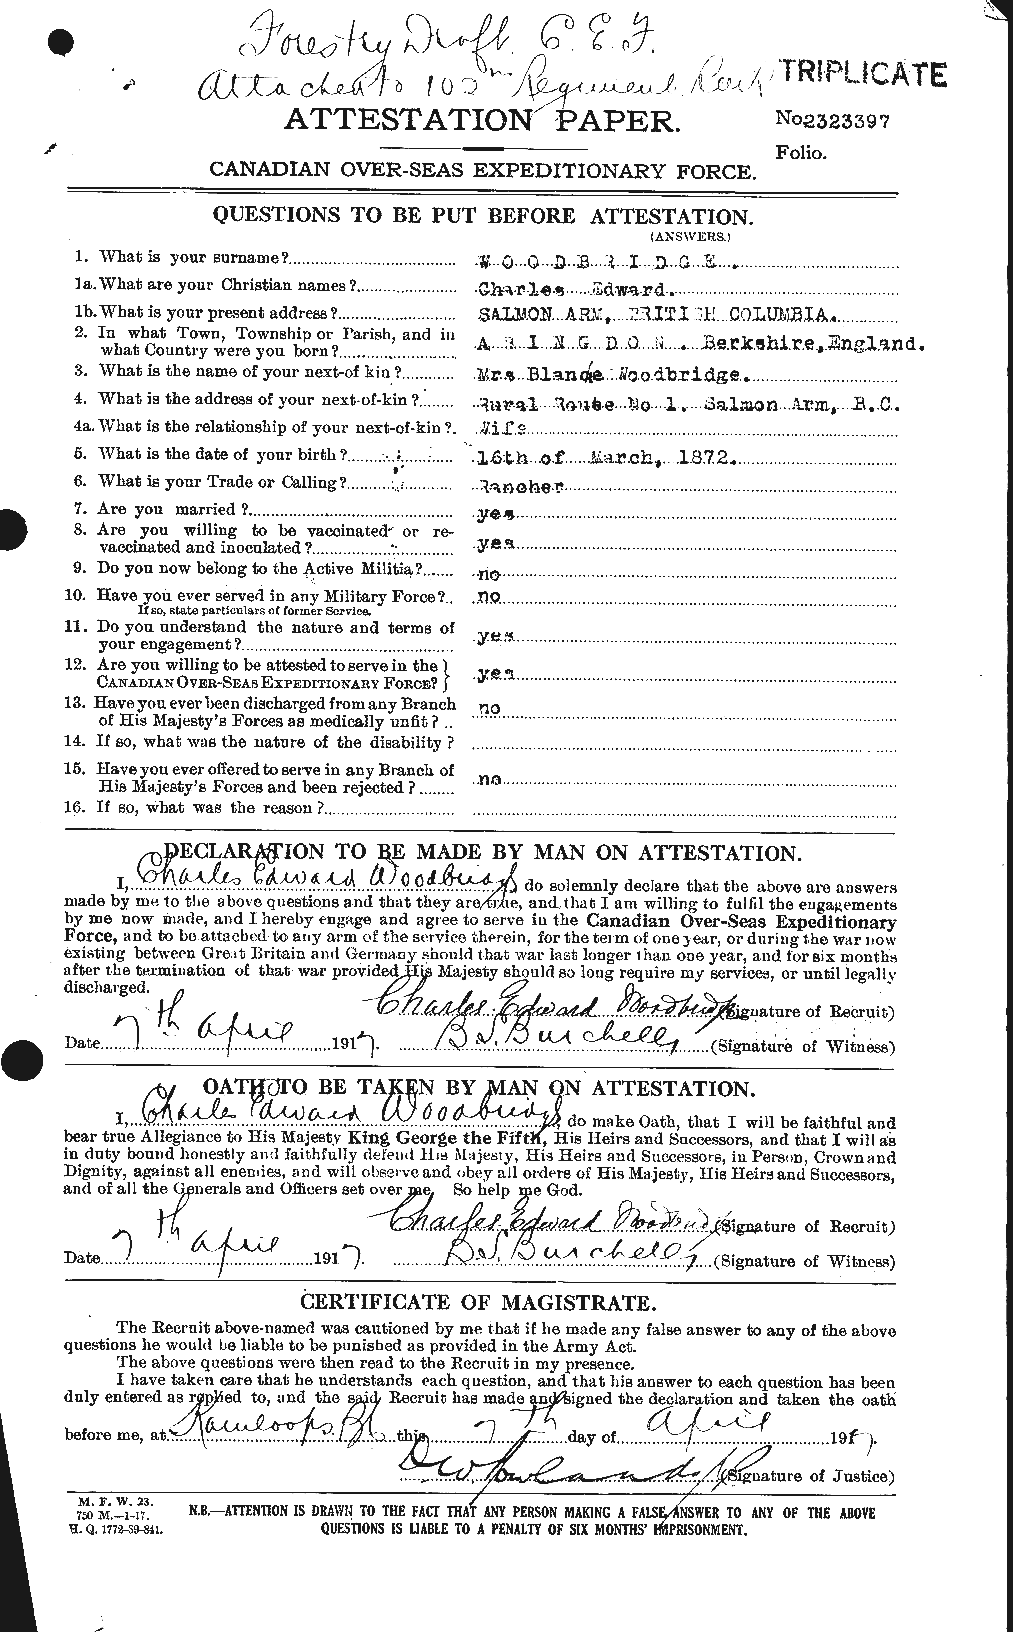 Personnel Records of the First World War - CEF 682728a